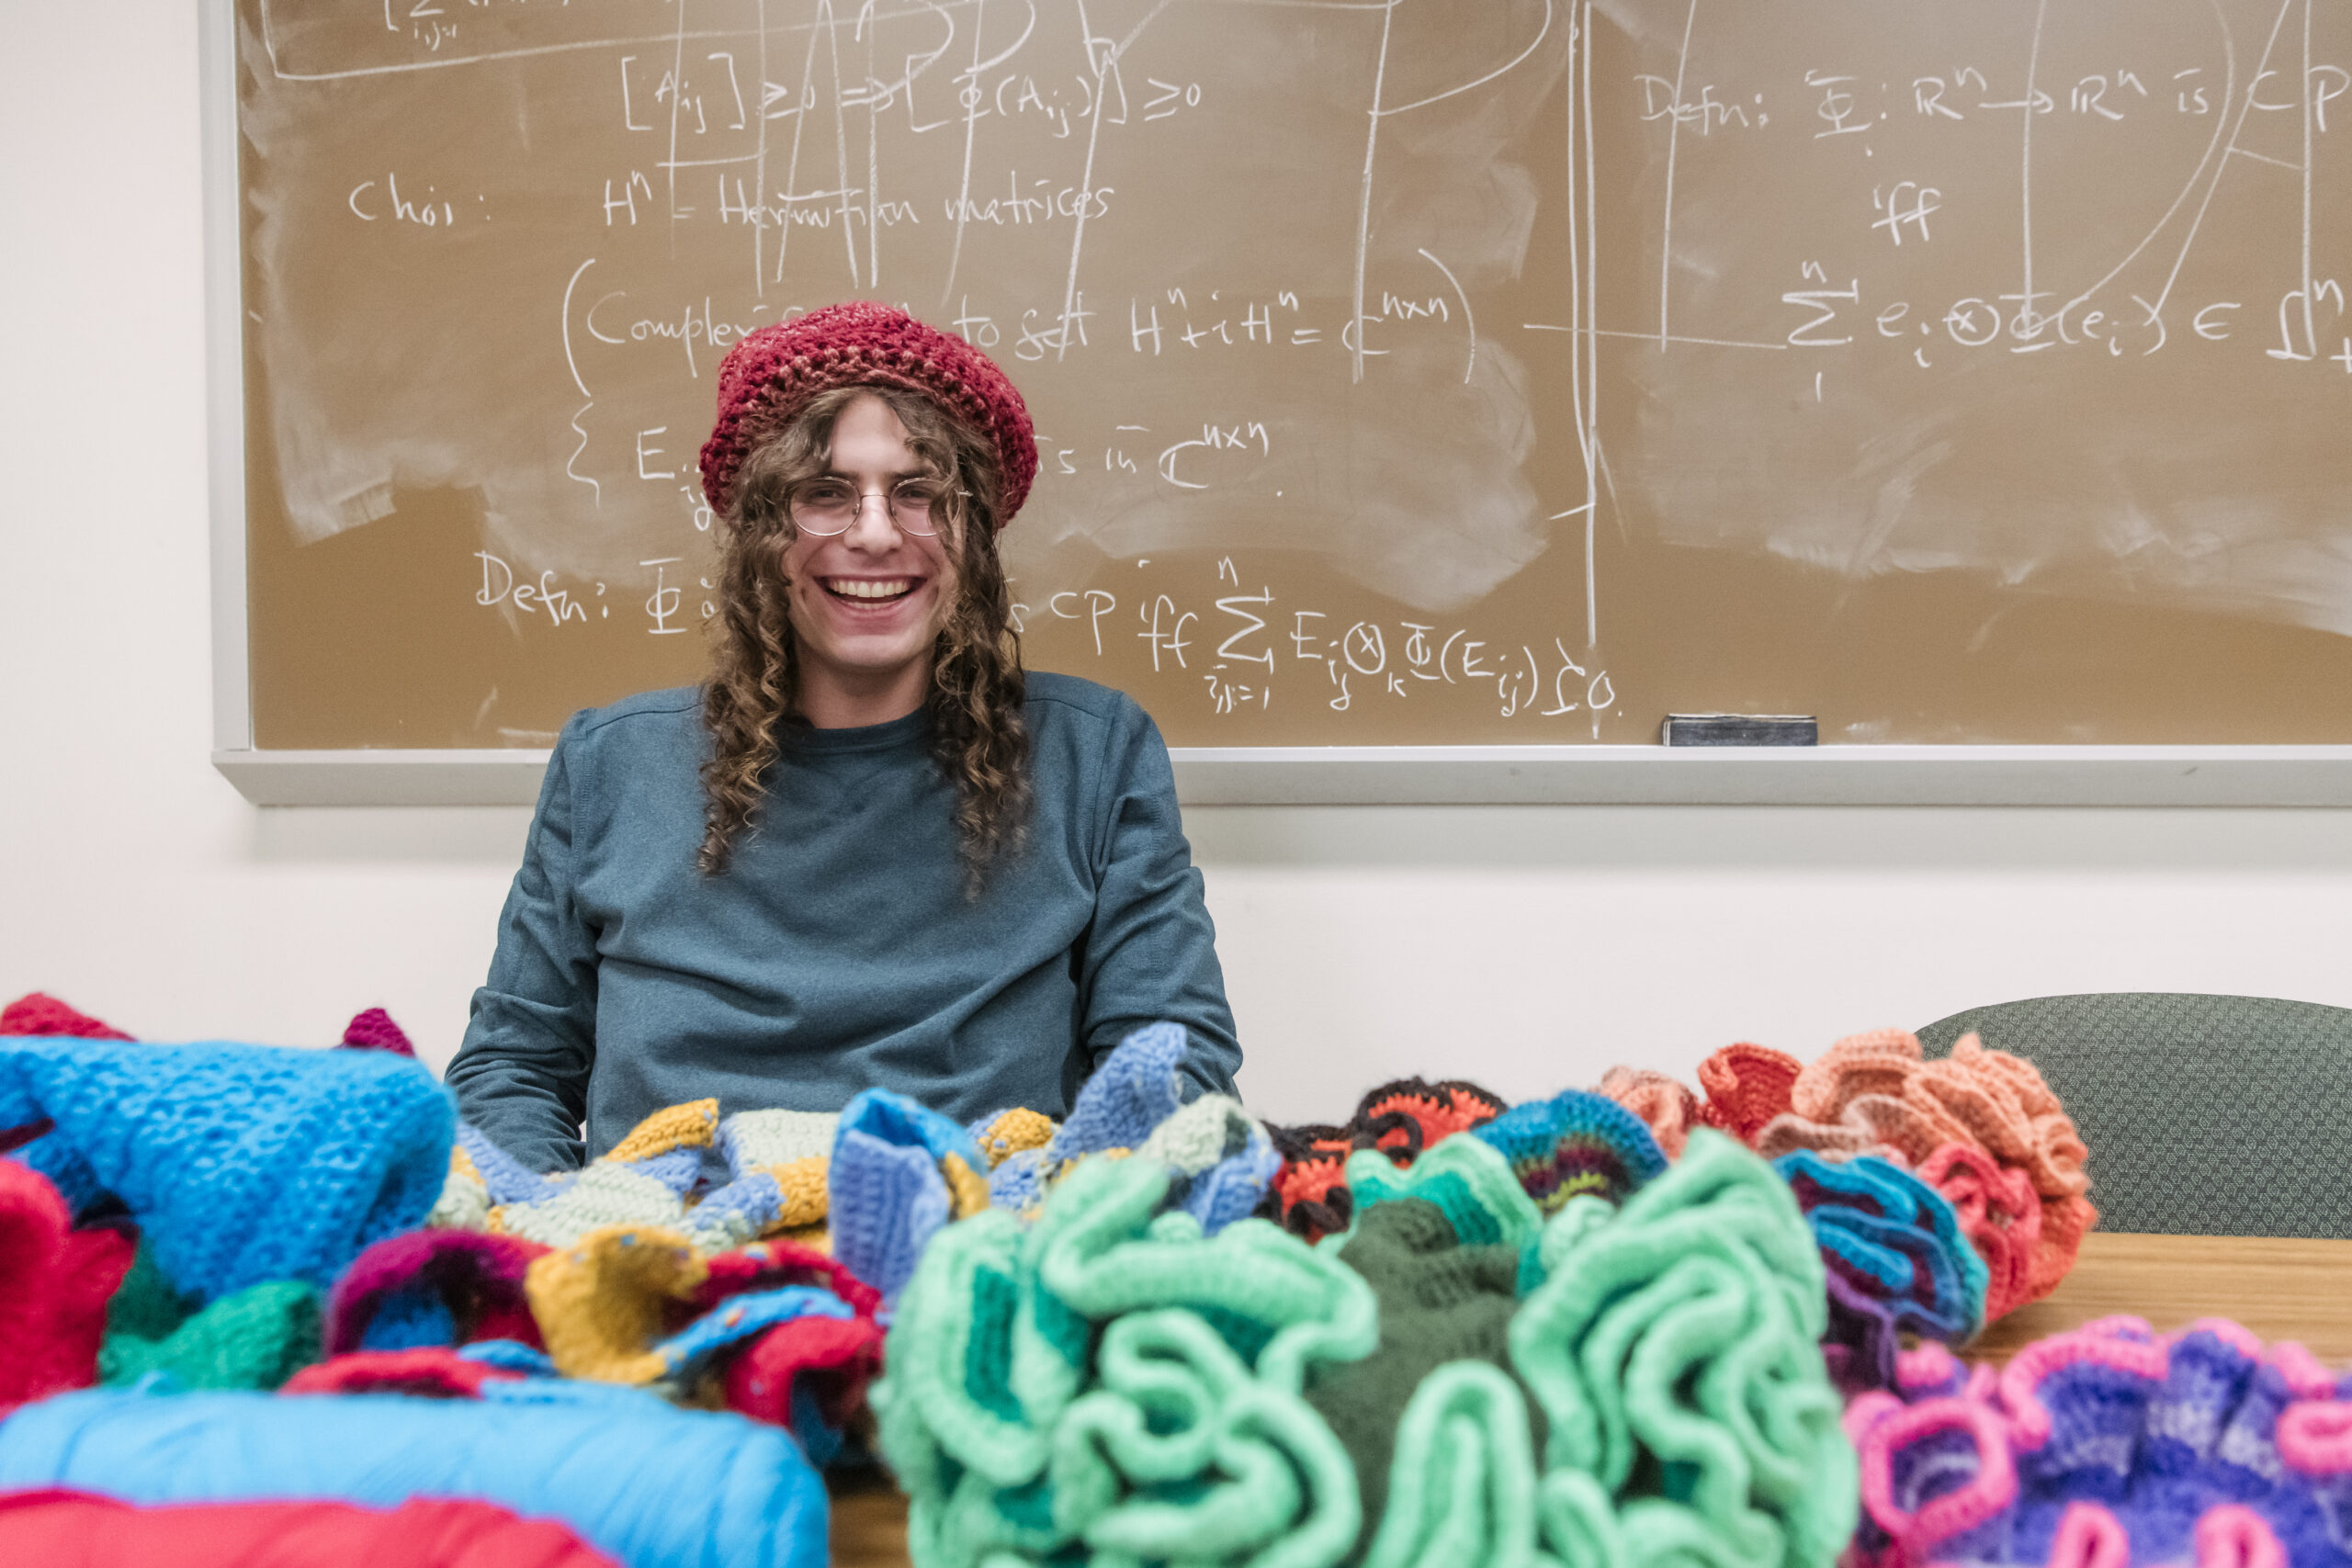 Stitching it all together, or how Ephraim Ruttenberg ’25 got hooked on math and crochet